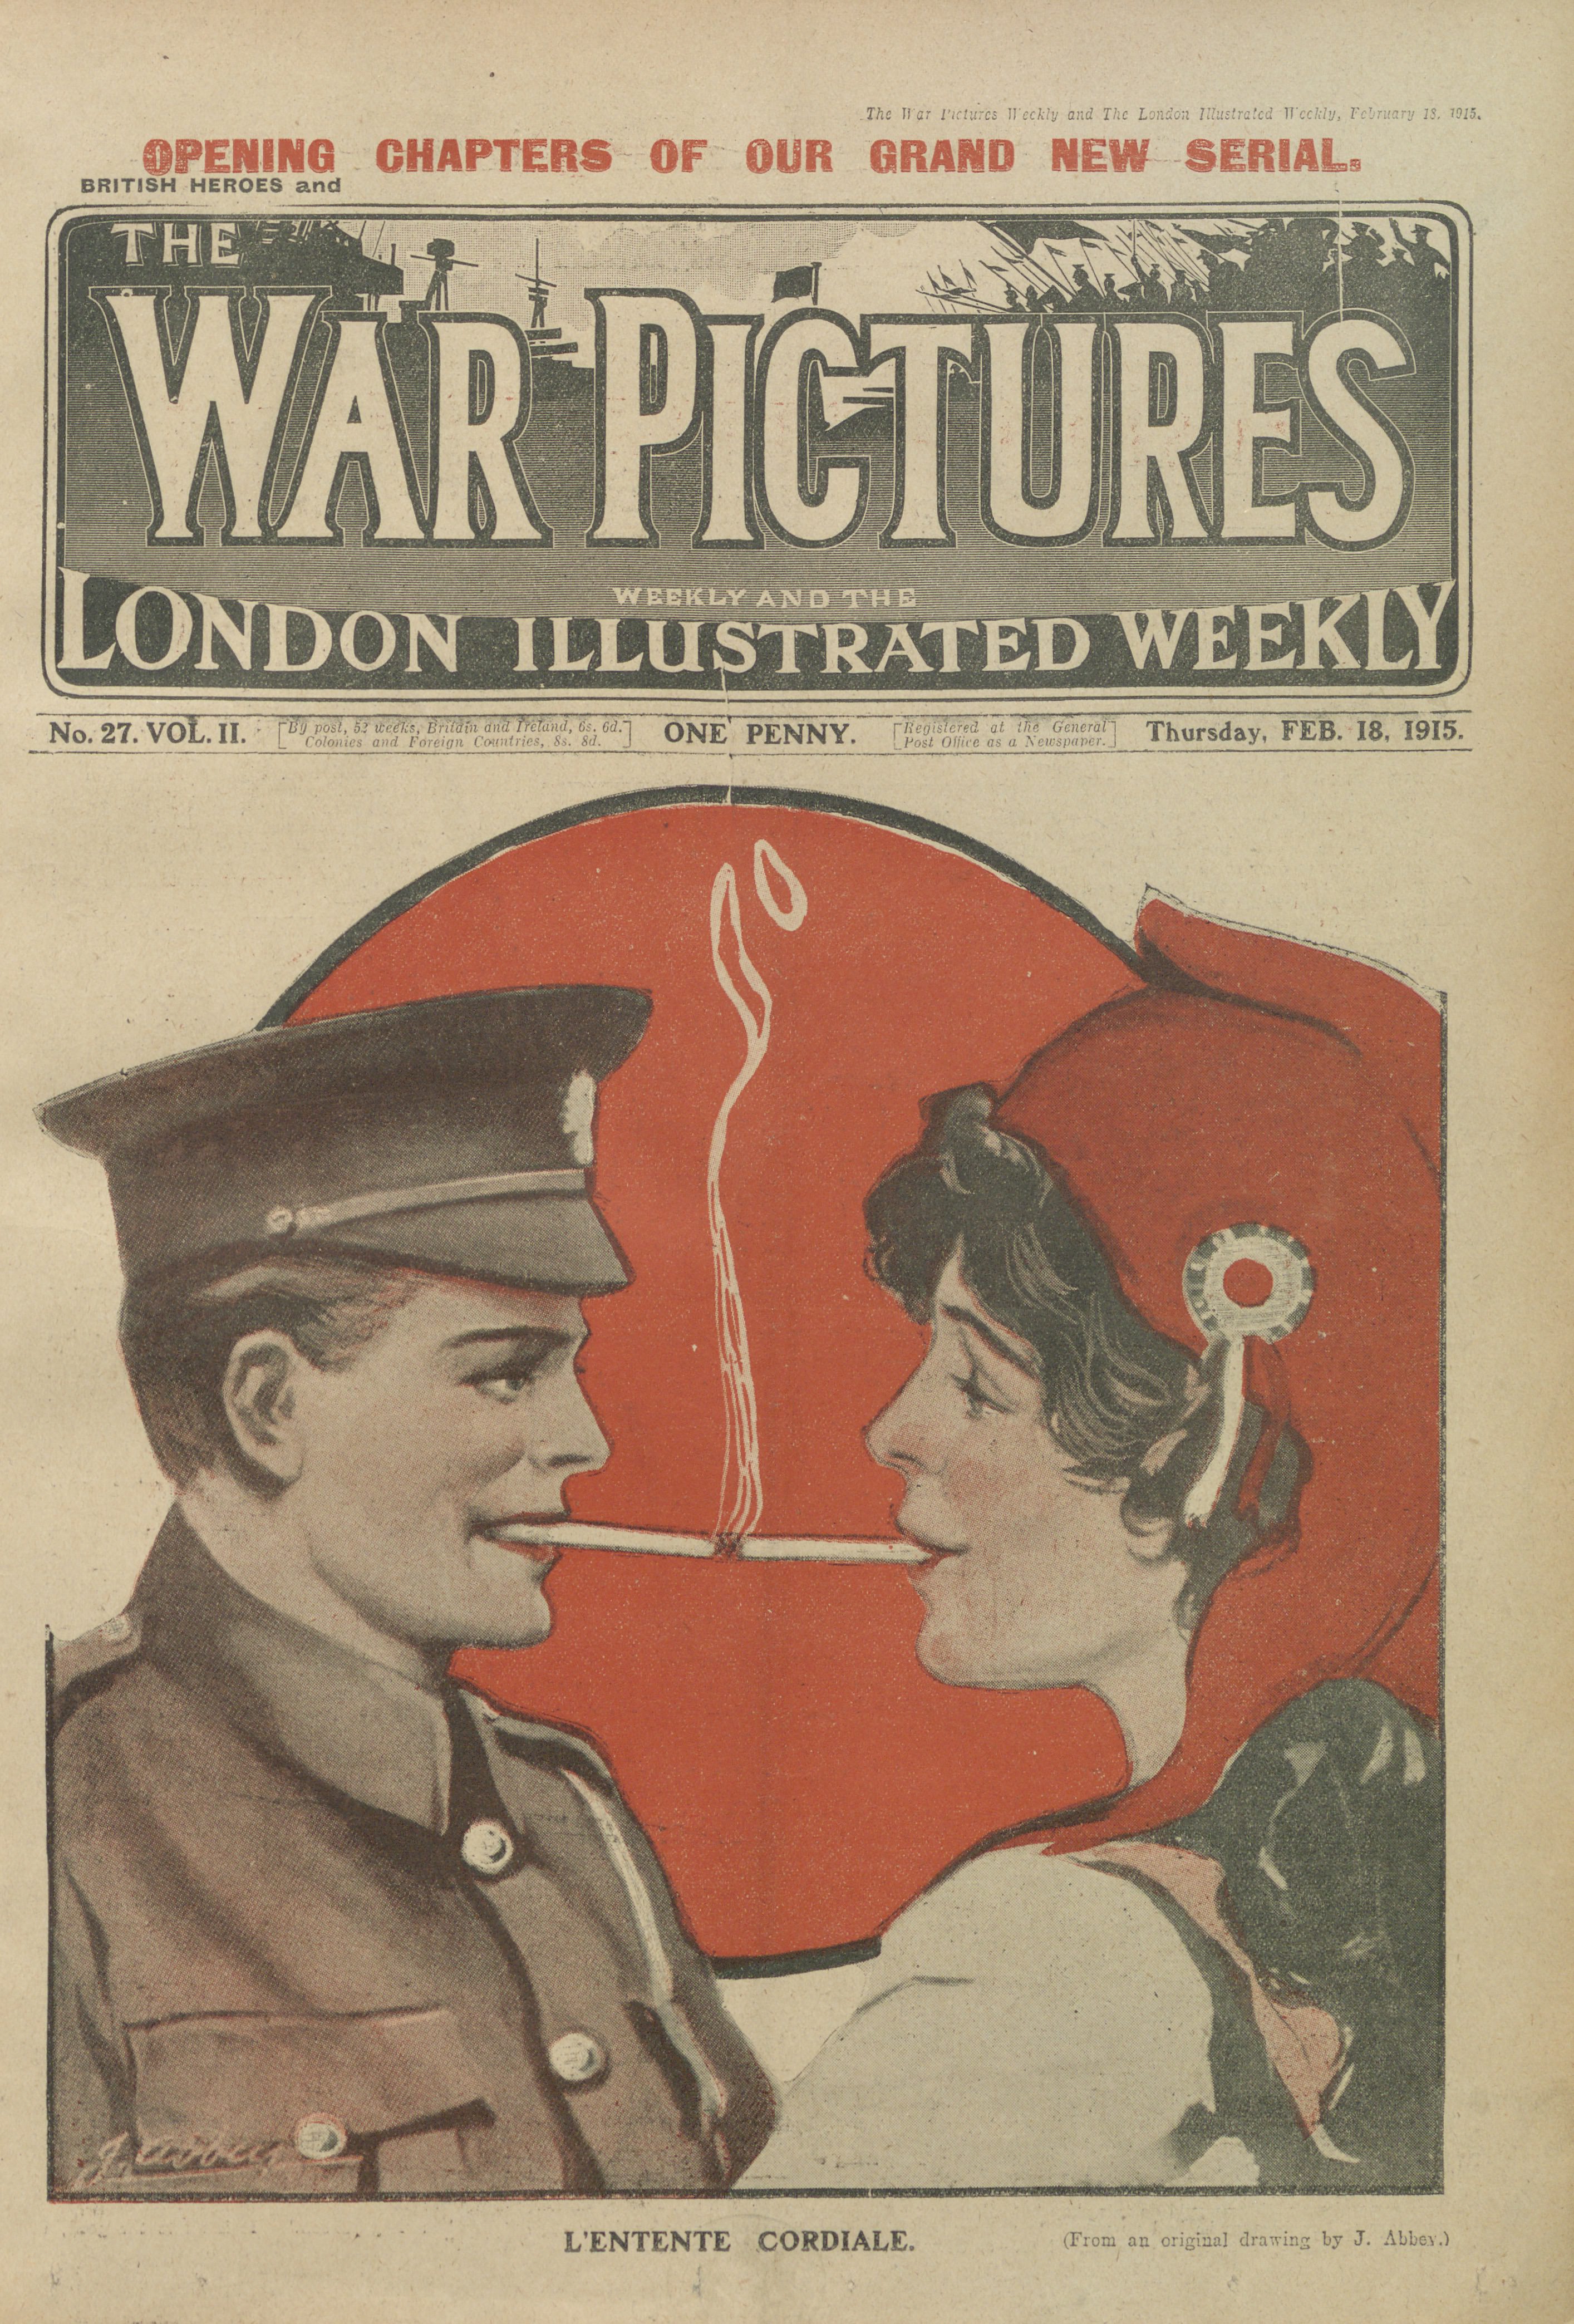 cover design (from an original drawing by J. Abbey) for <i>The War Pictures Weekly</i> and <i>The London Illustrated Weekly</i>, no. 27, Vol. II, 18 February 1915. Collection of The British Library.